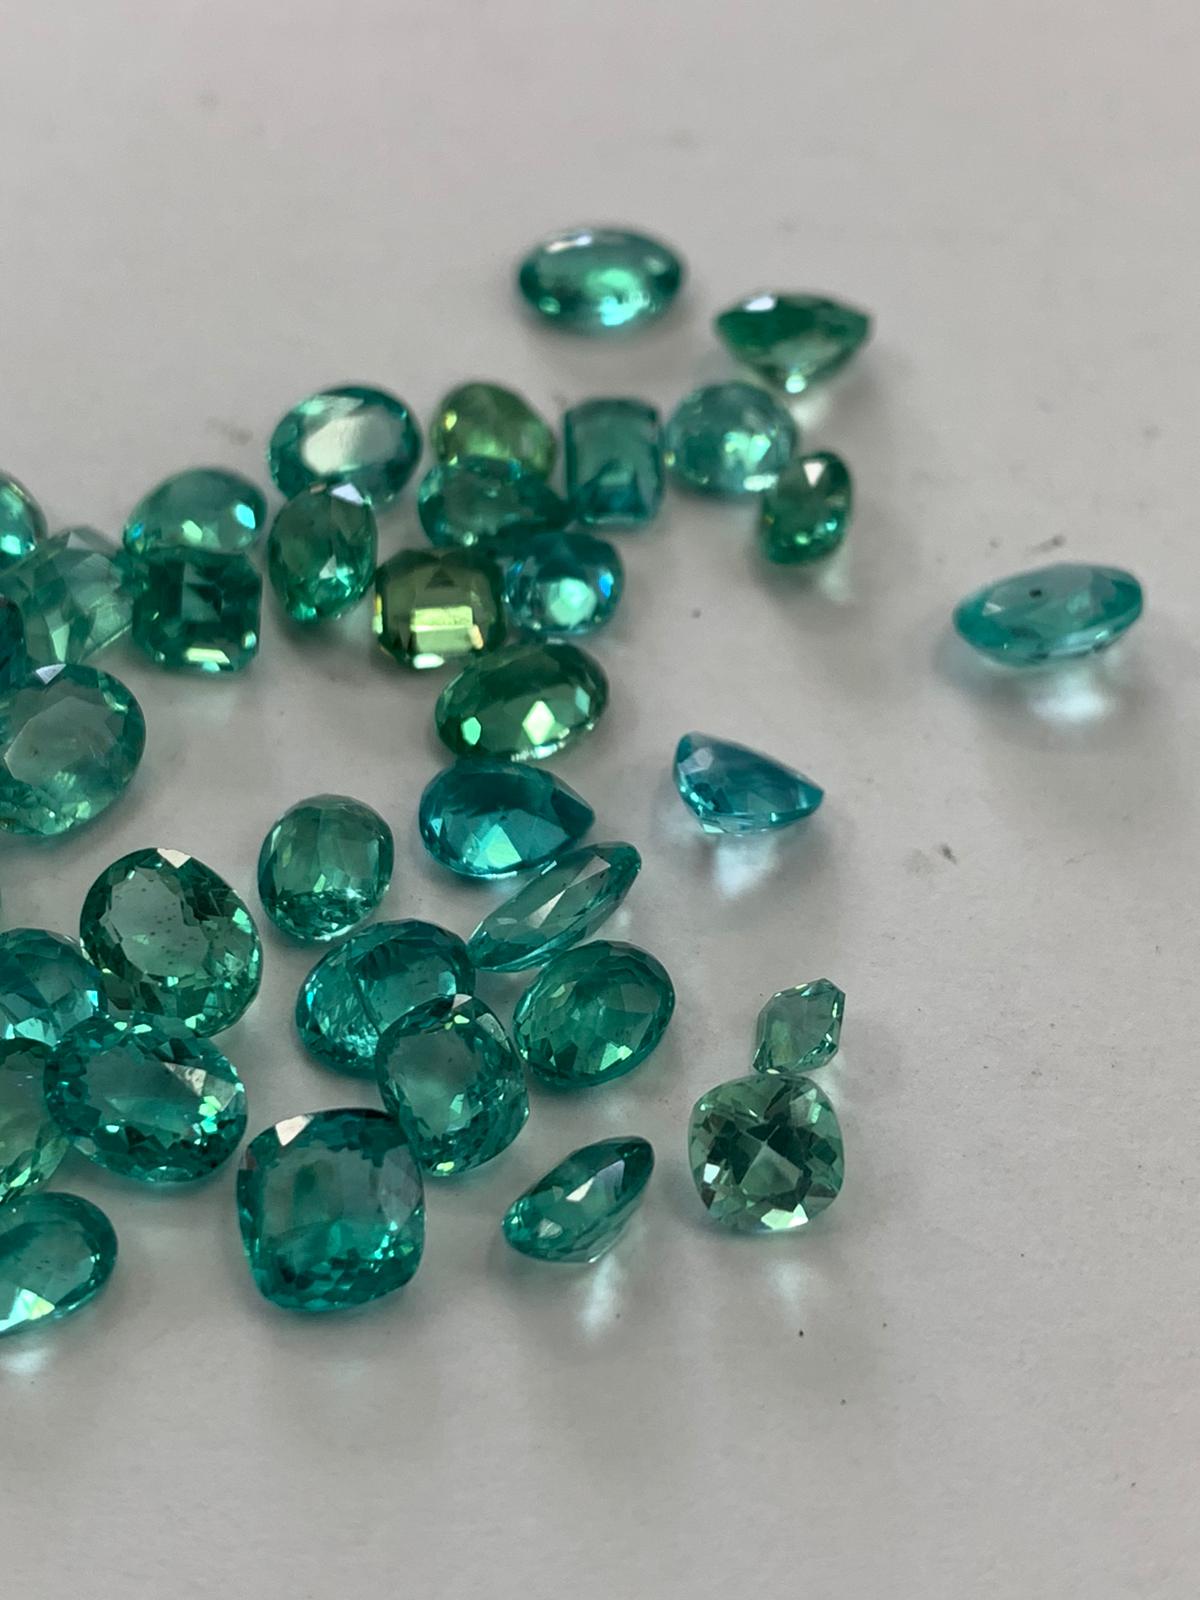 Best place to buy Natural Apatite for jewelry designing